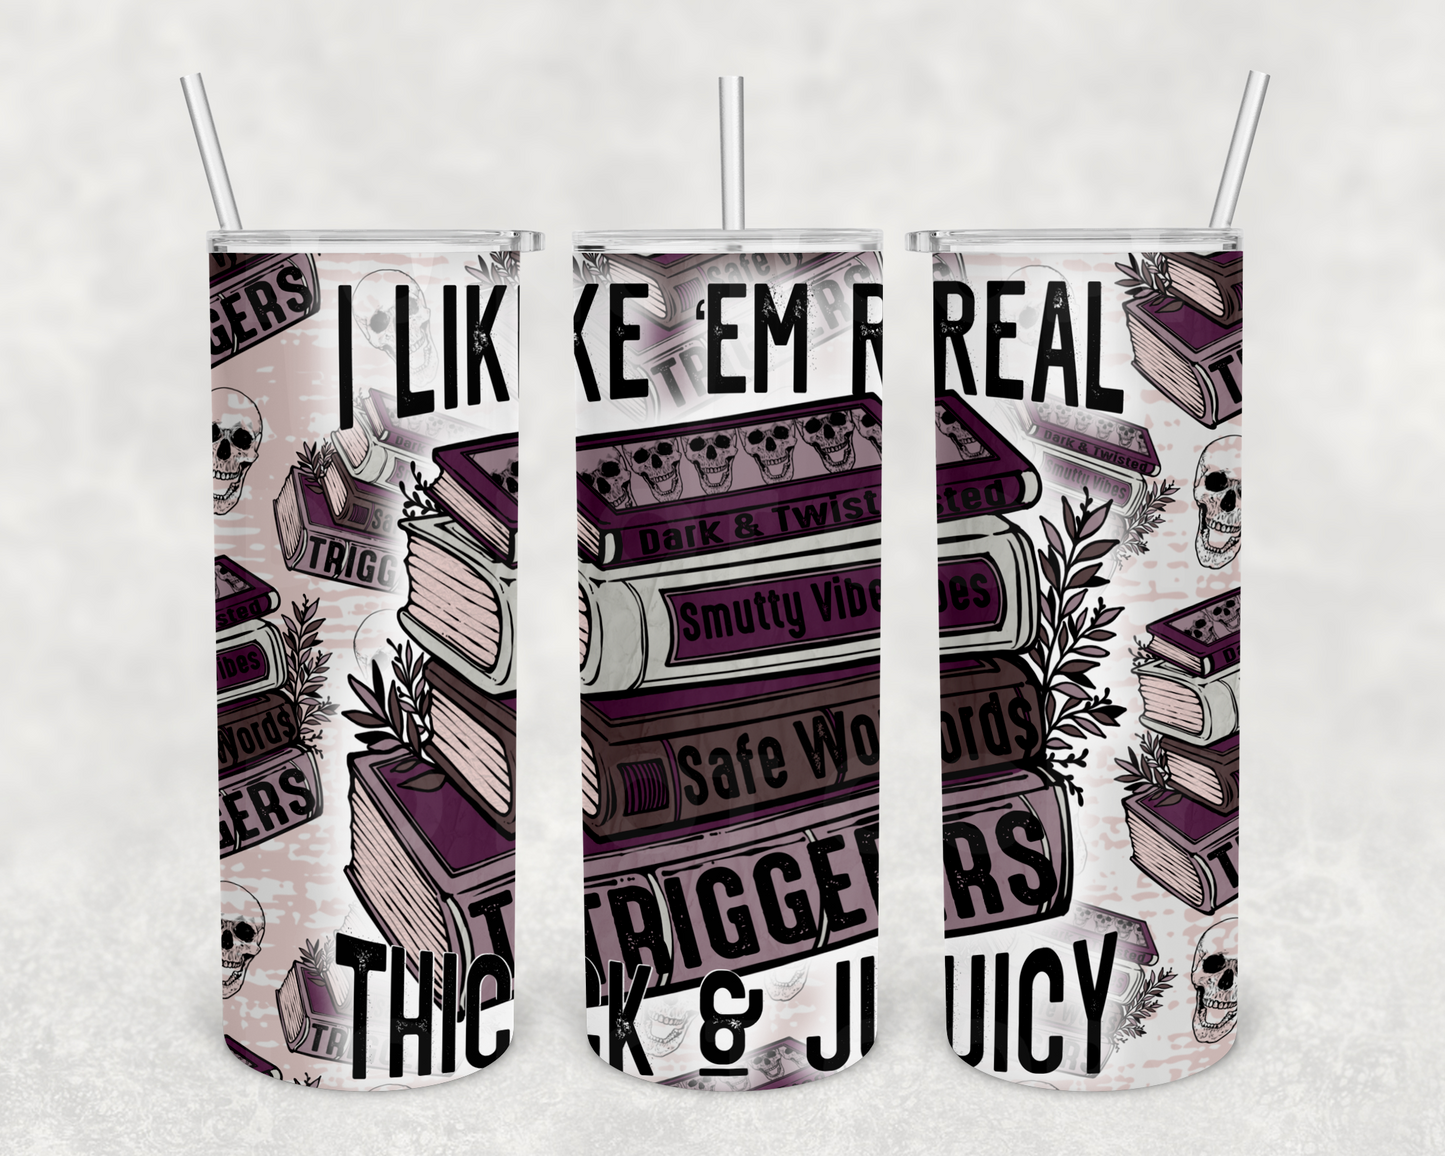 Thick & Juicy Smut books 20 oz tumbler (finished product)